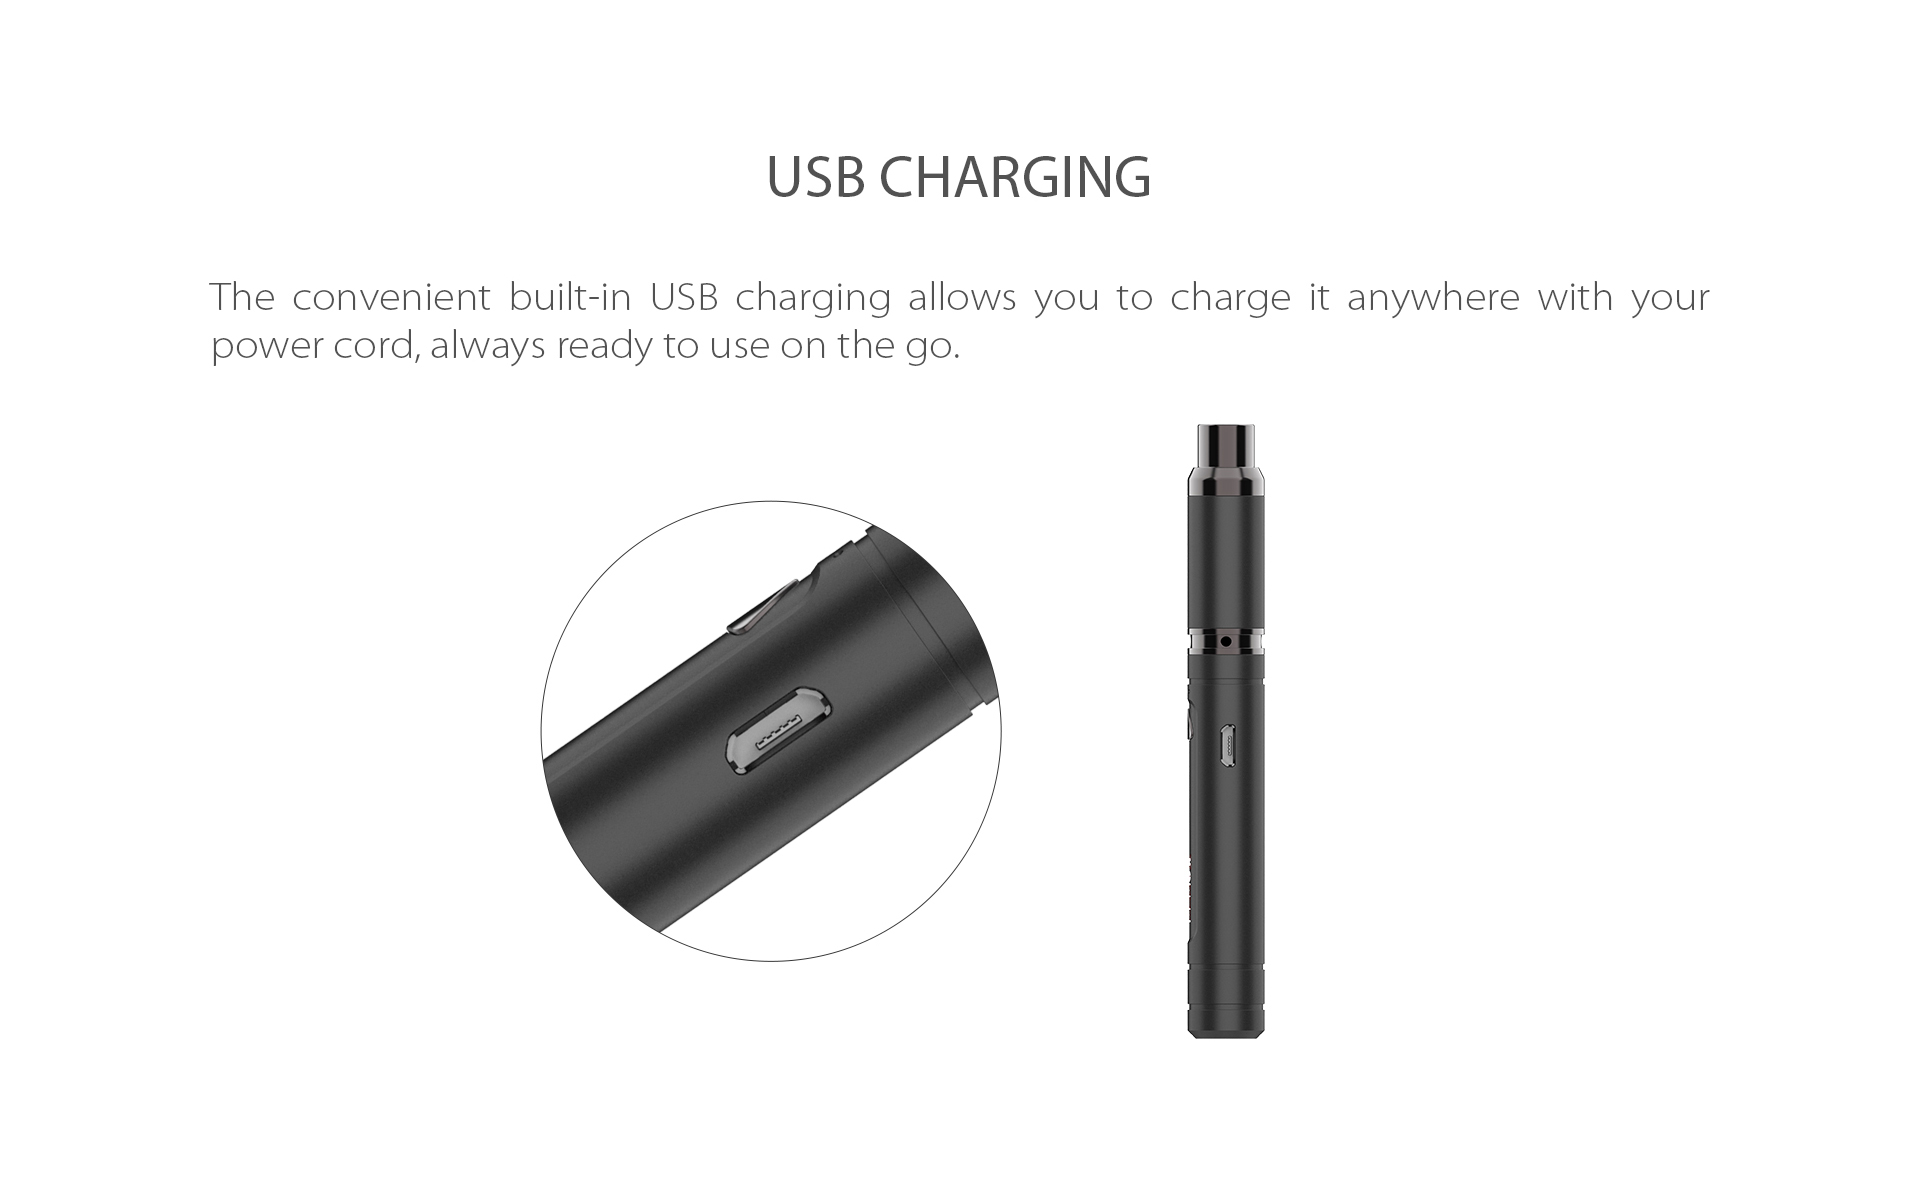 Yocan Armor Vaporizer pen comes with the convenient built-in USB charging